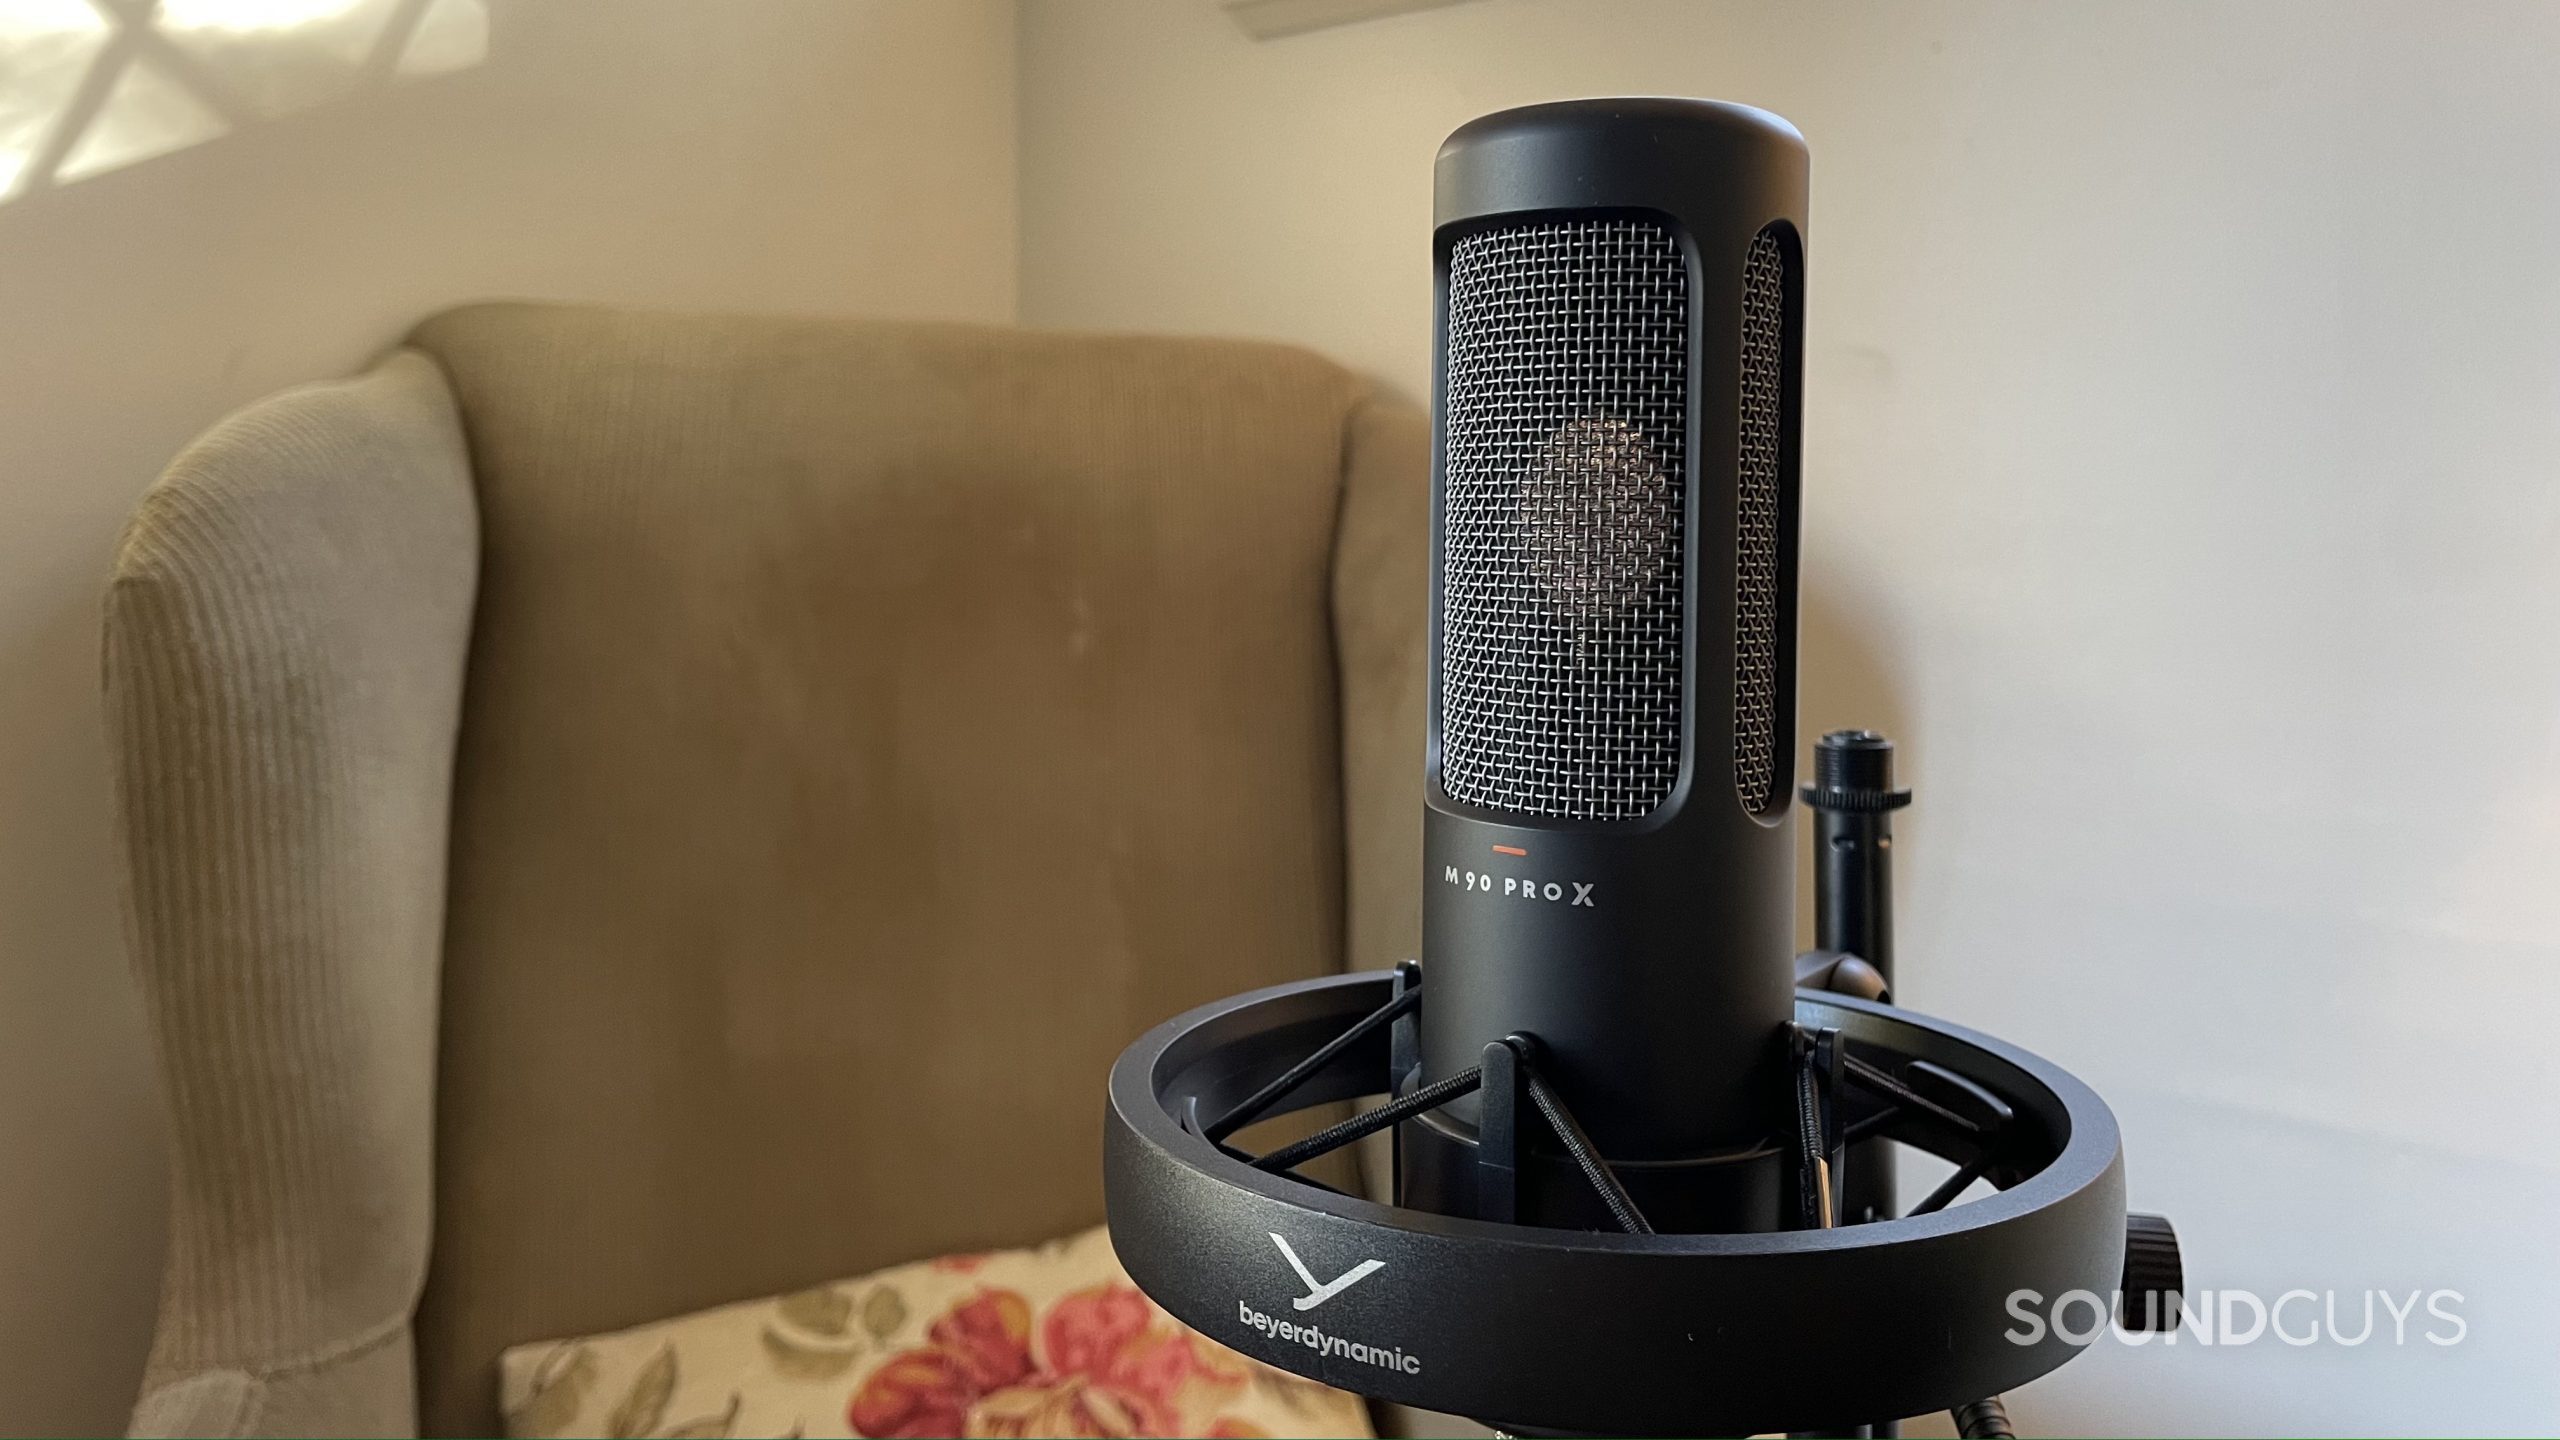 Beyerdynamic M90 PRO X in its shock mount with an armchair in the background.